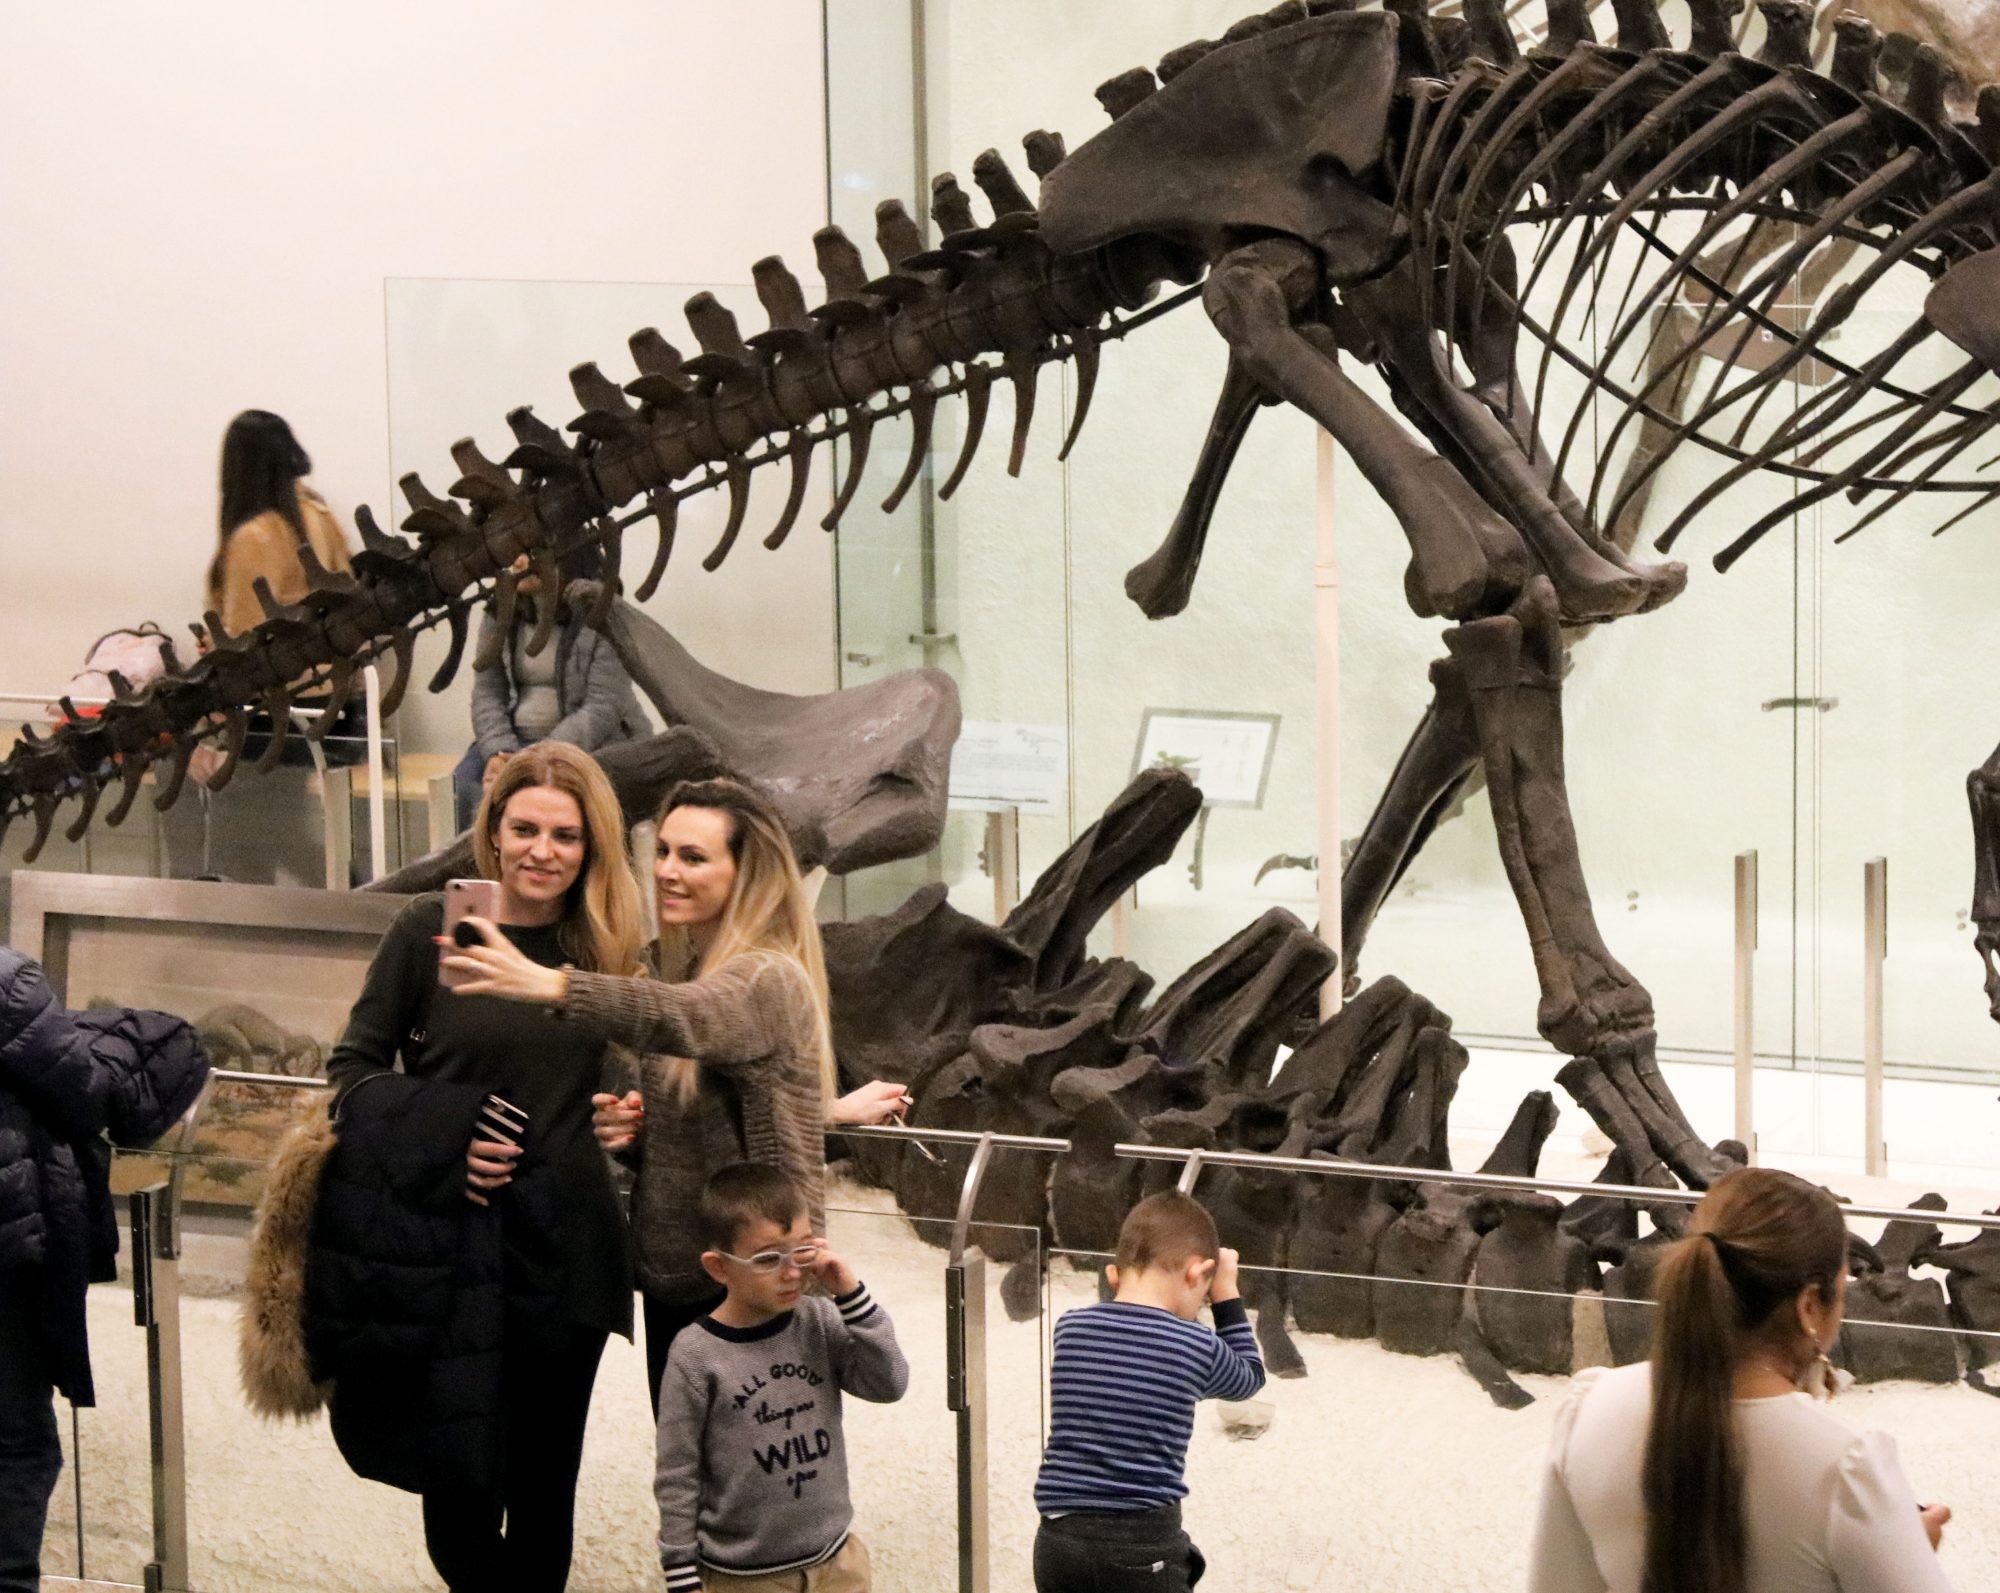 Women posing in front of dinosaur fossils at museum